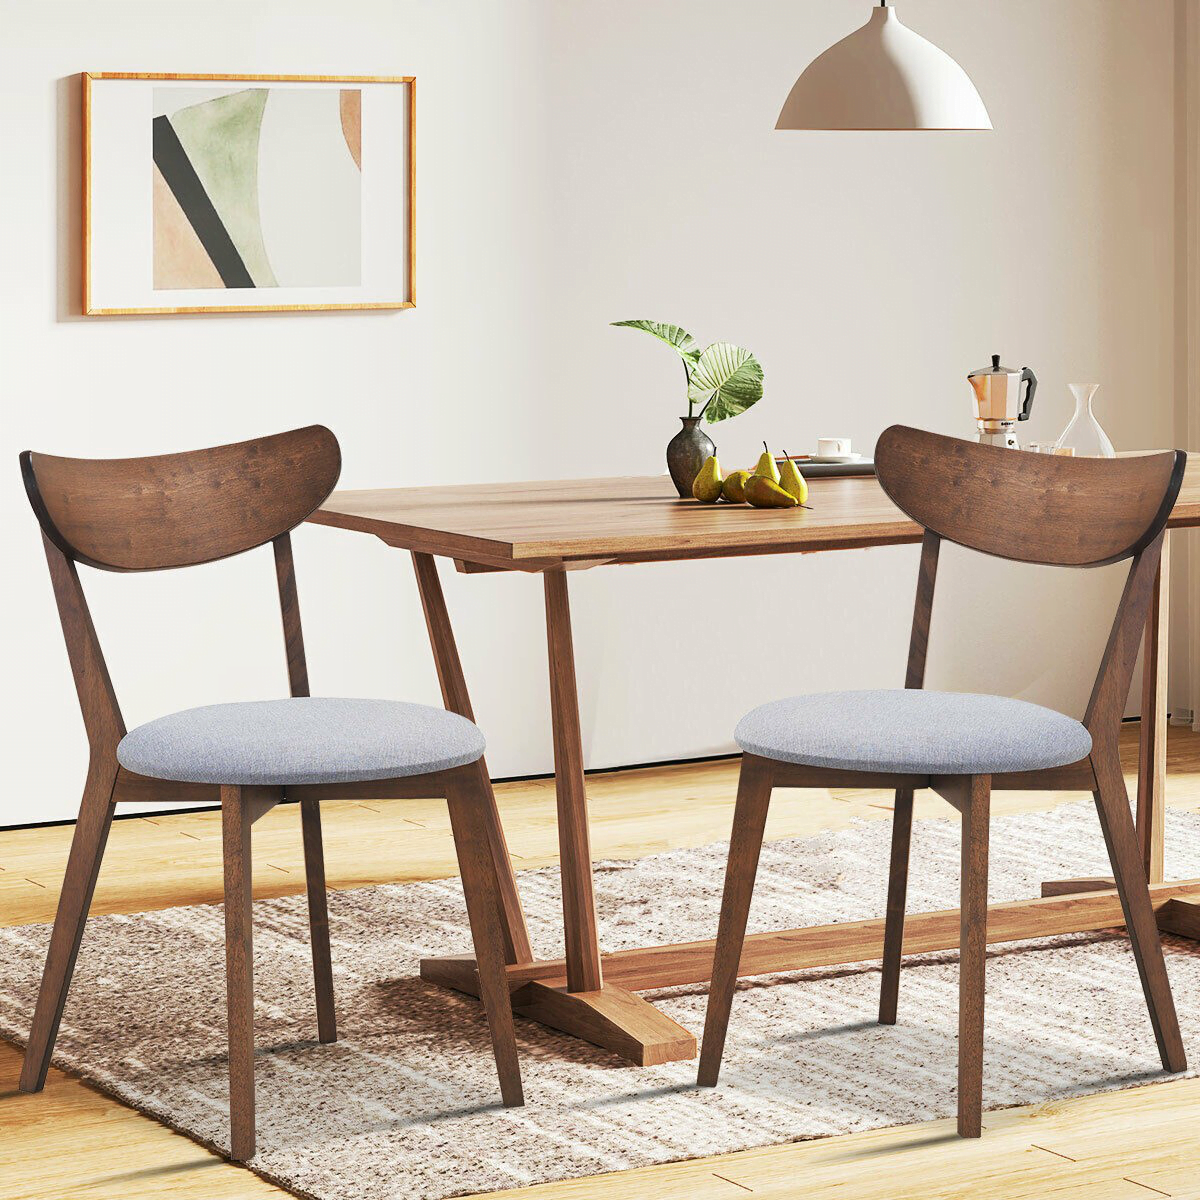 Mid Century Wood Dining Chairs Flatout Design: Mid Century Modern Dining Chairs